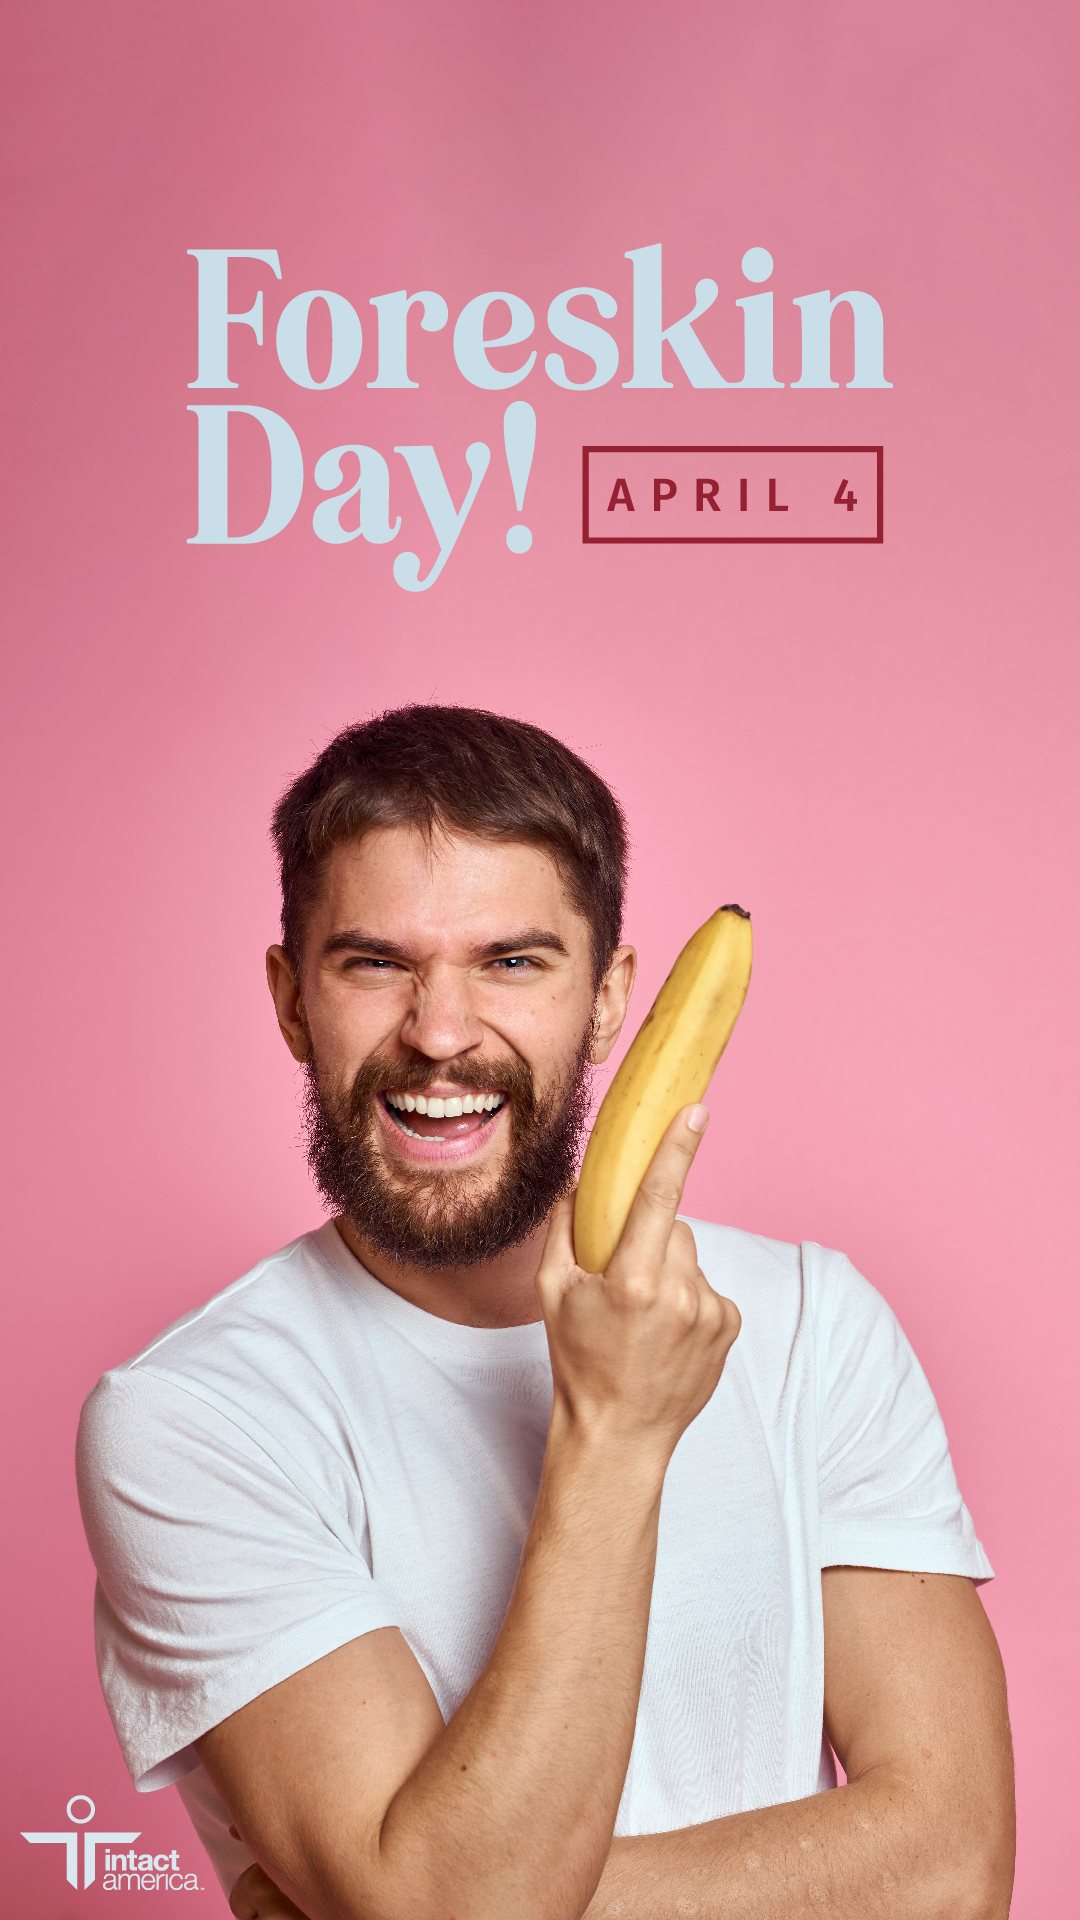 Image of a man holding a banana with the Foreskin Day logo above it'